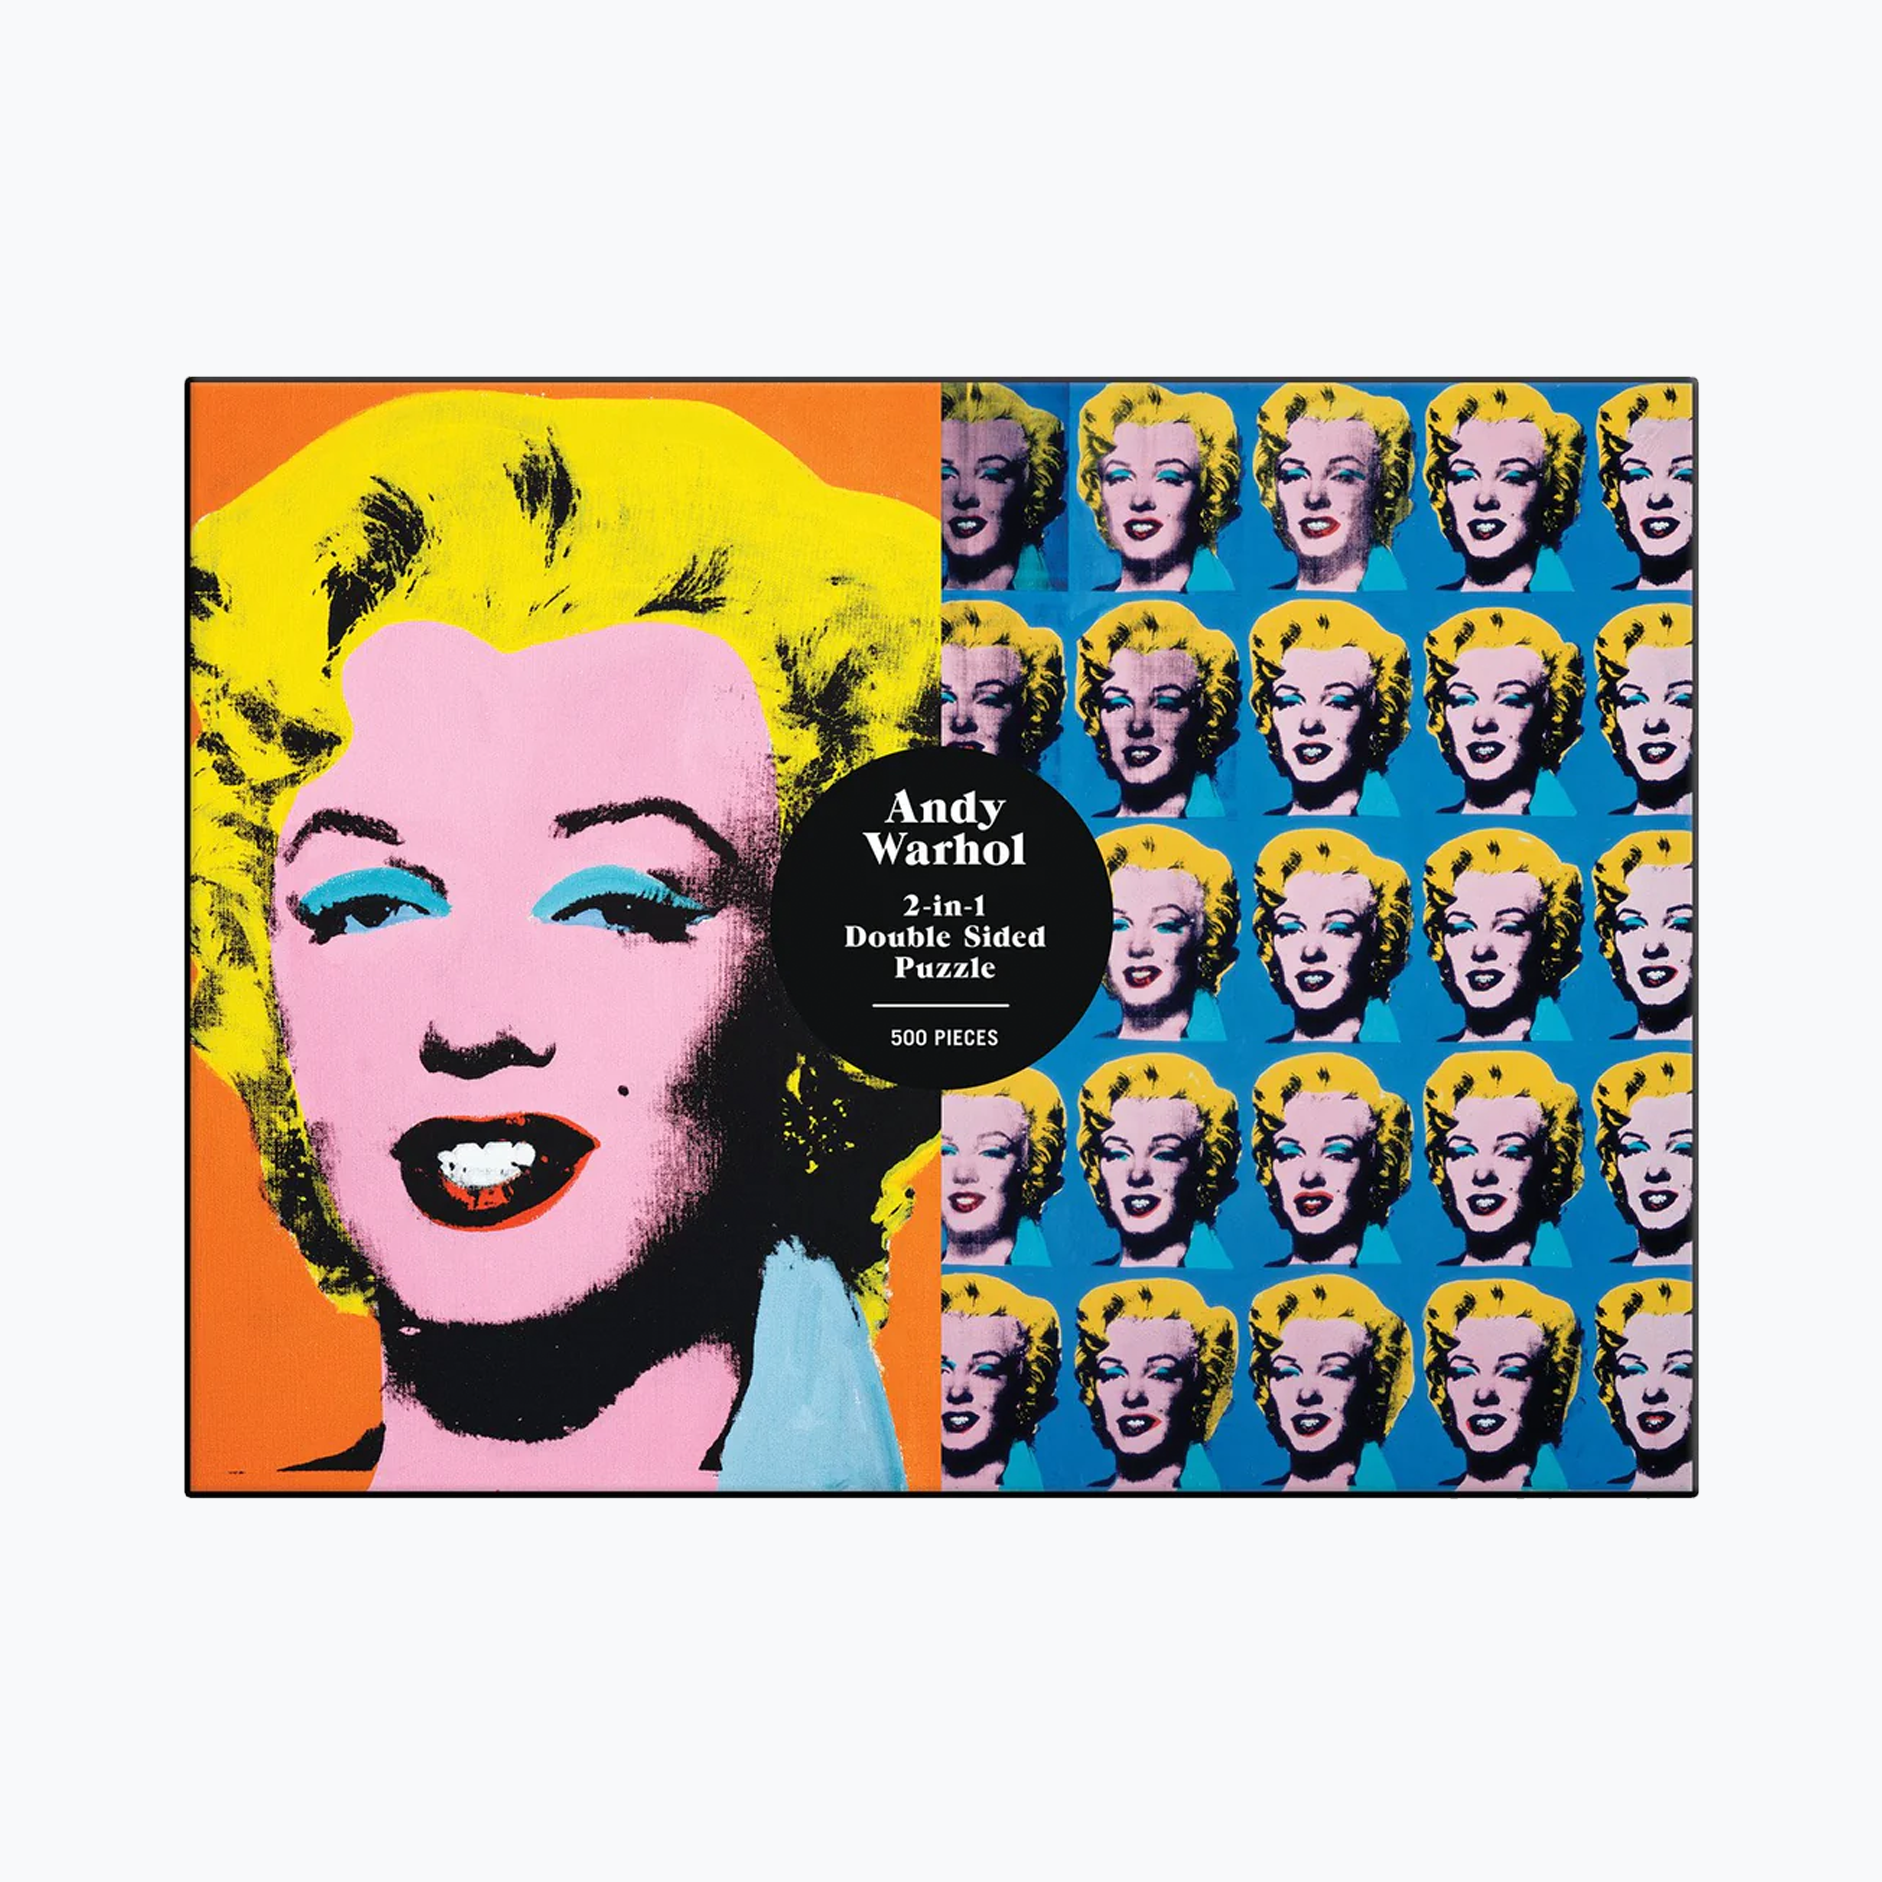 Andy Warhol - 'Marilyn' 500 Piece Double Sided Puzzle